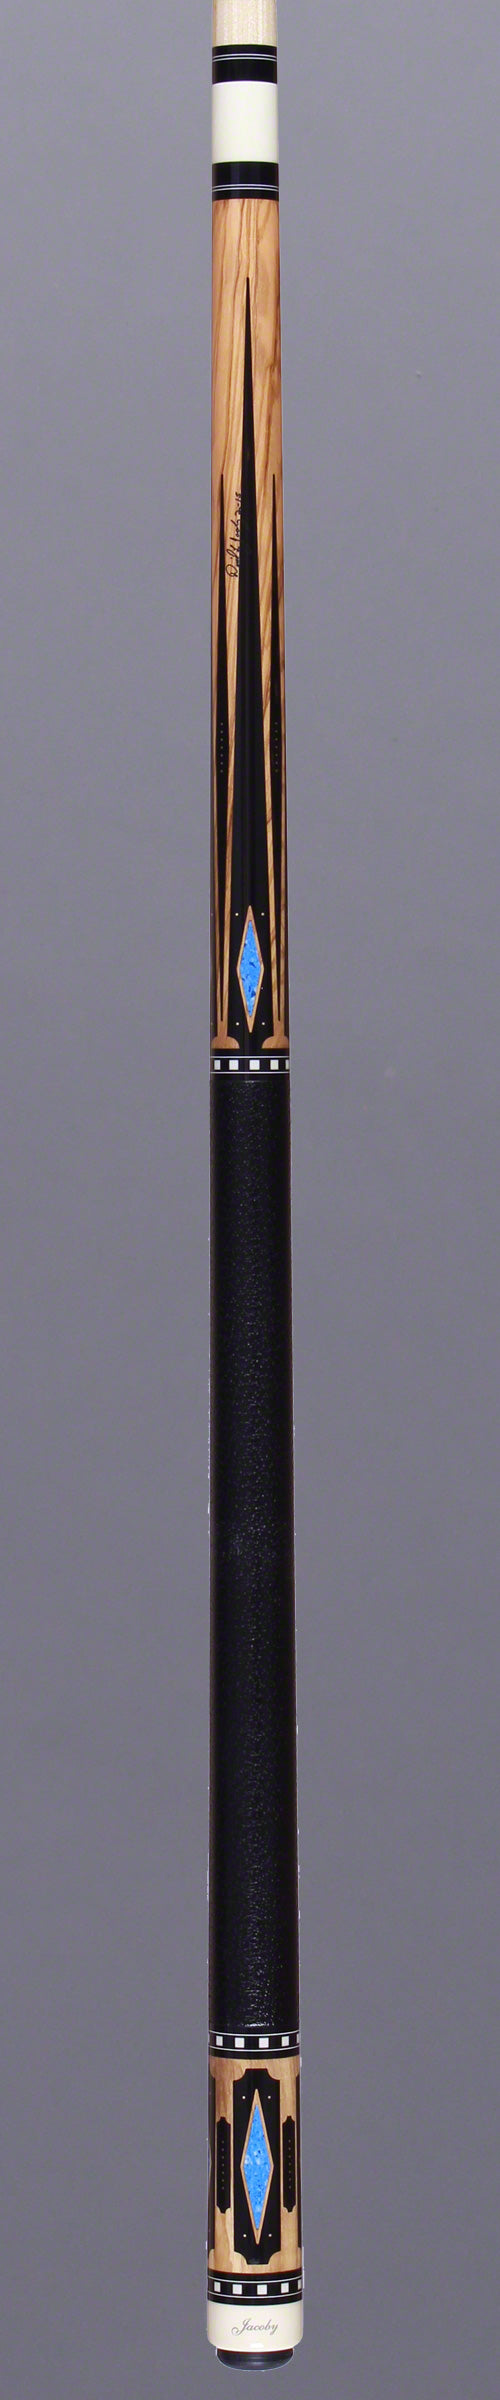 Jacoby HB5 Olivewood with Ebony Points Pool Cue